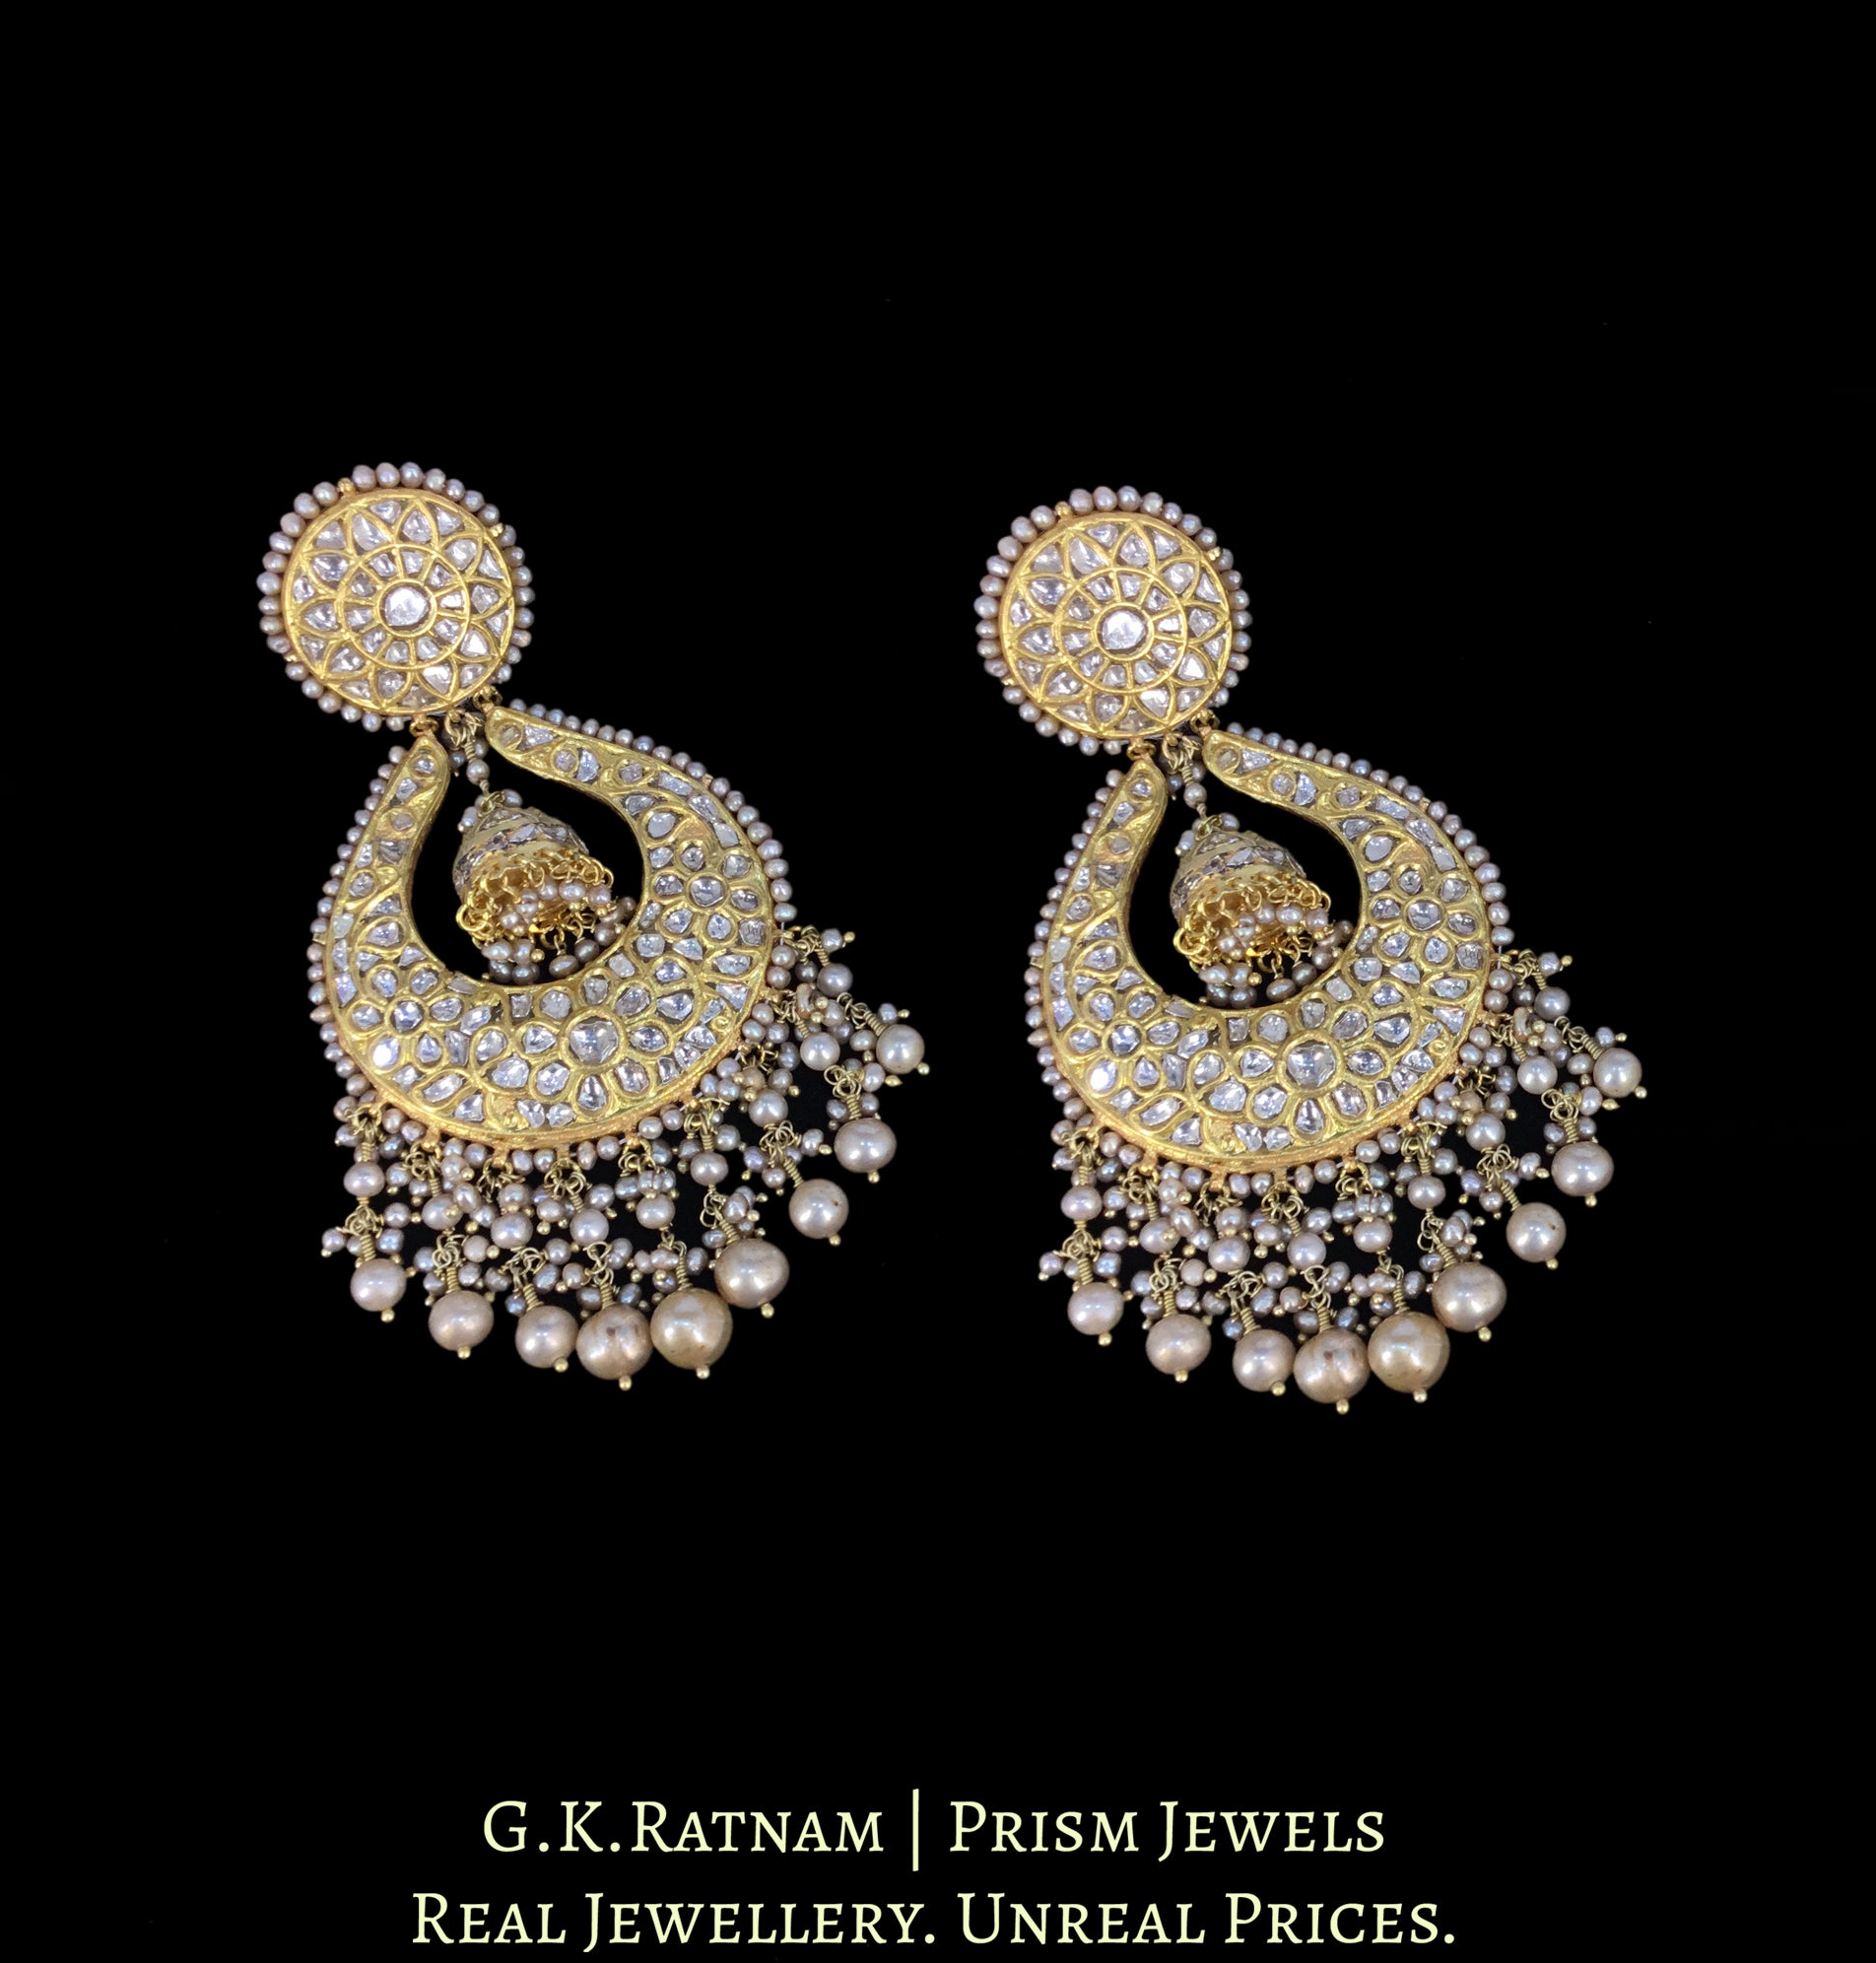 23k Gold and Diamond Polki Chand Bali Earring Pair with Small Jhumkis